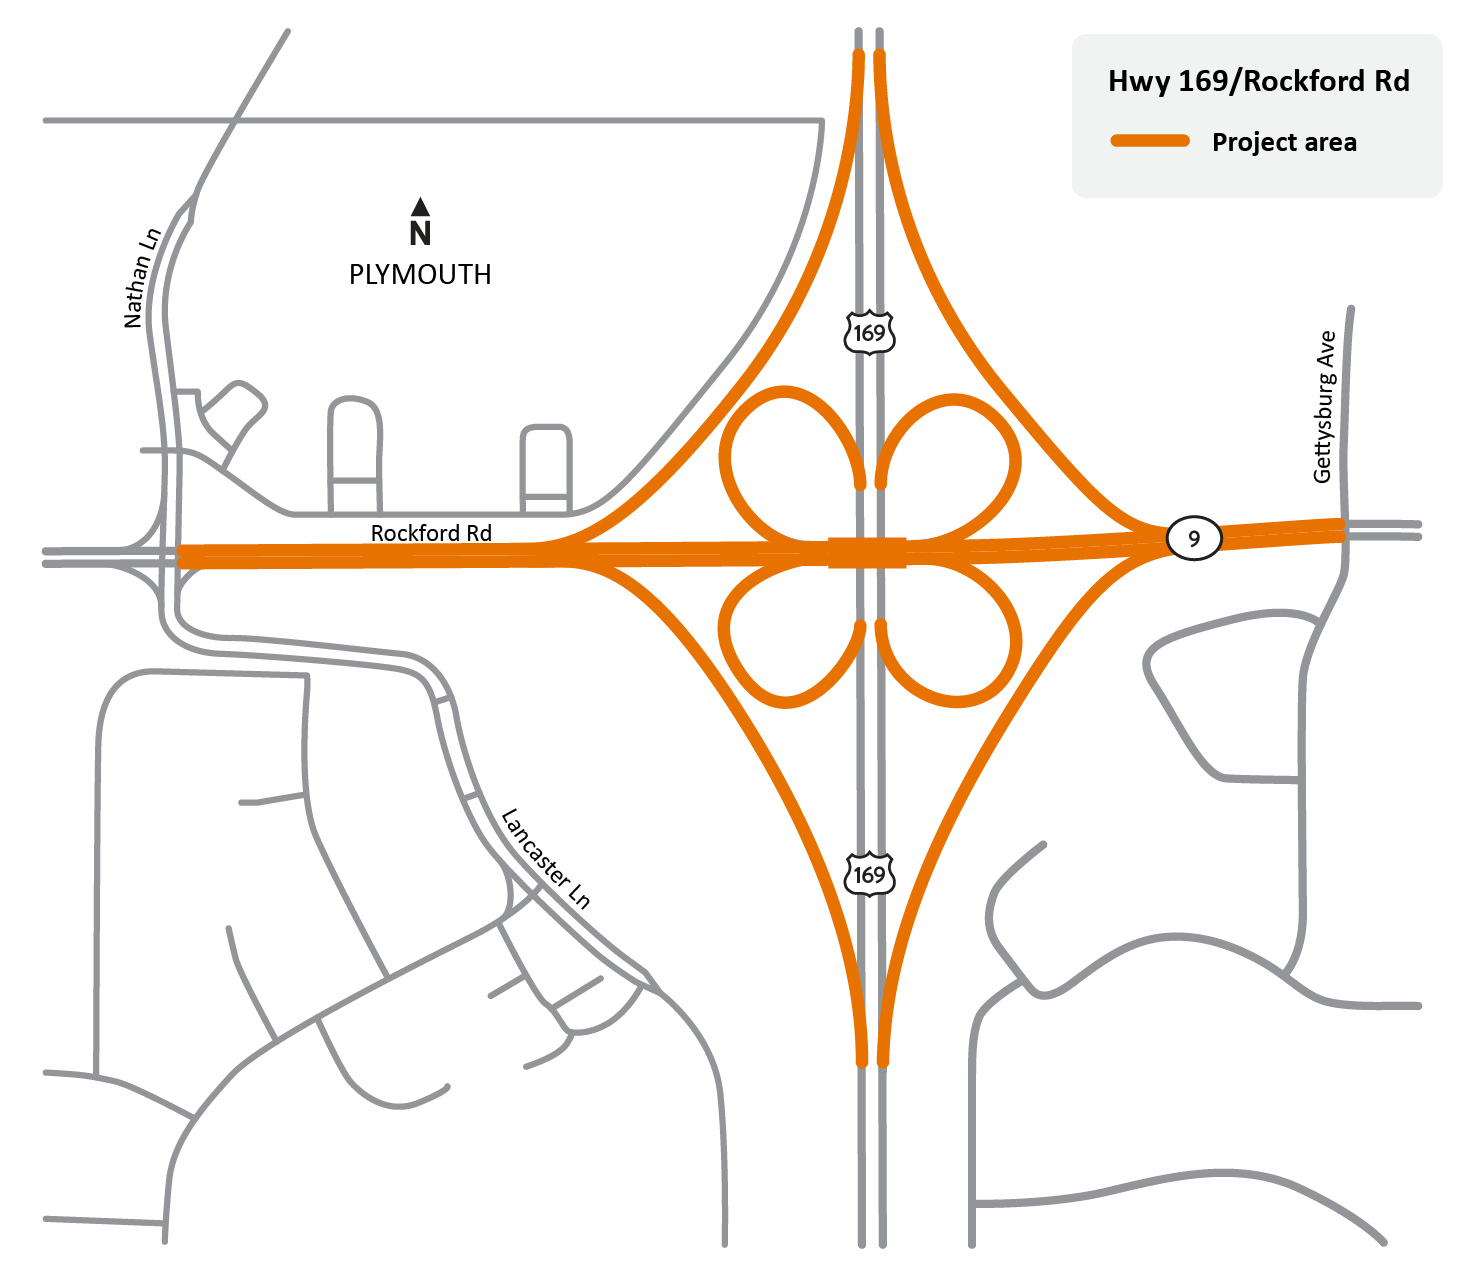 Highway 169 and Rockford Rd./Co. Rd. 9 intersection in Plymouth and New Hope project location map